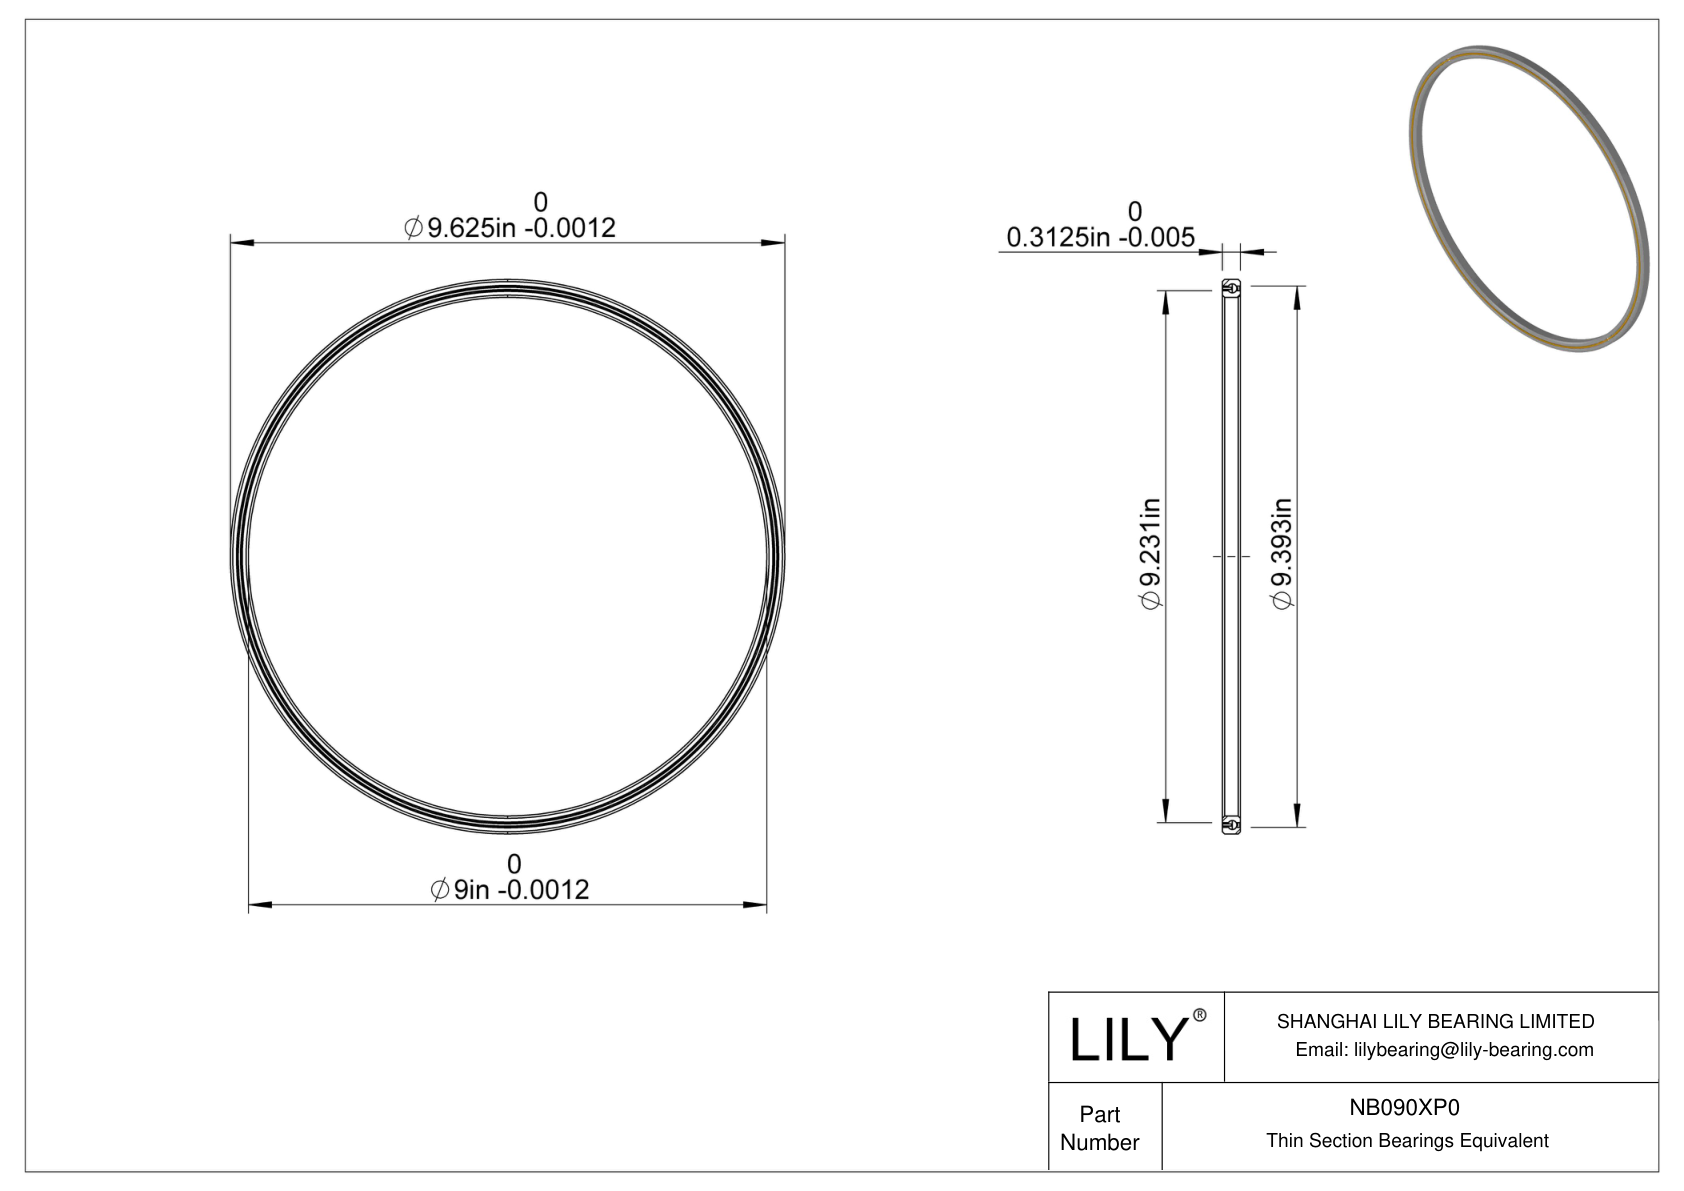 NB090XP0 Constant Section (CS) Bearings cad drawing